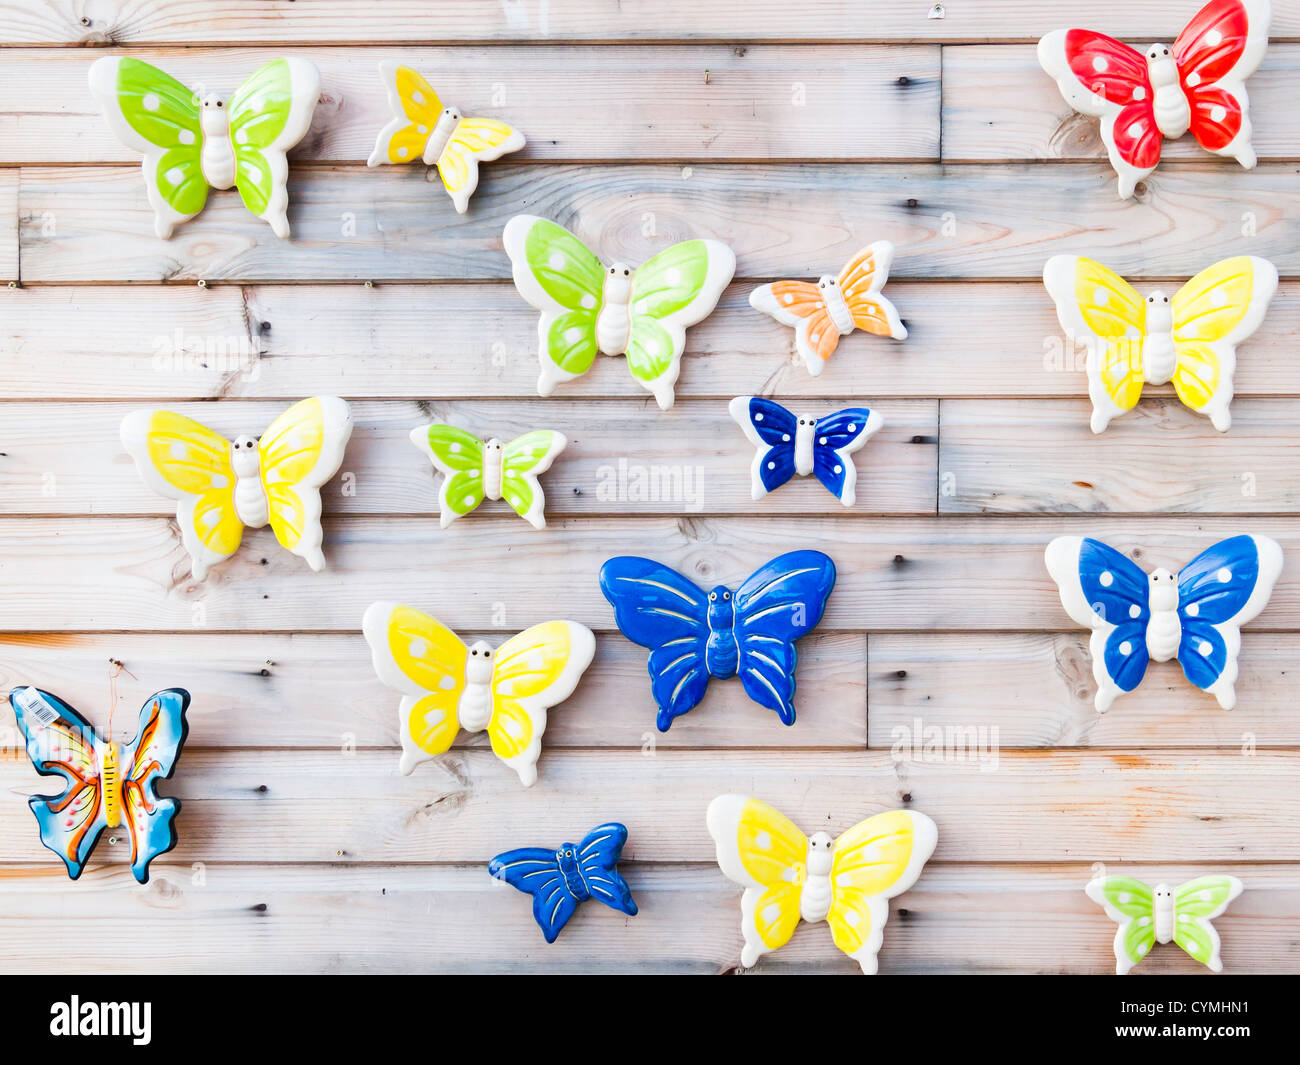 Ceramic butterflies for wall decoration for sale in a garden centre Stock Photo